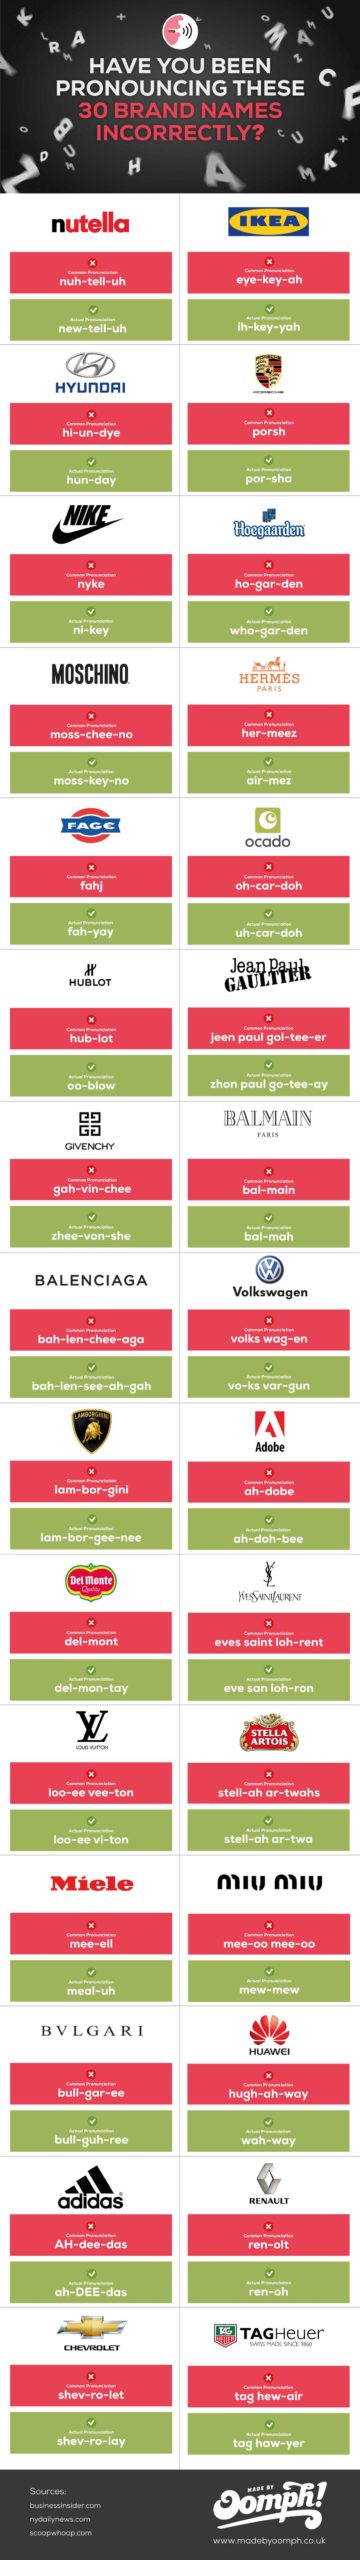 Brand Names You Might Be Pronouncing Incorrectly [Infographic]